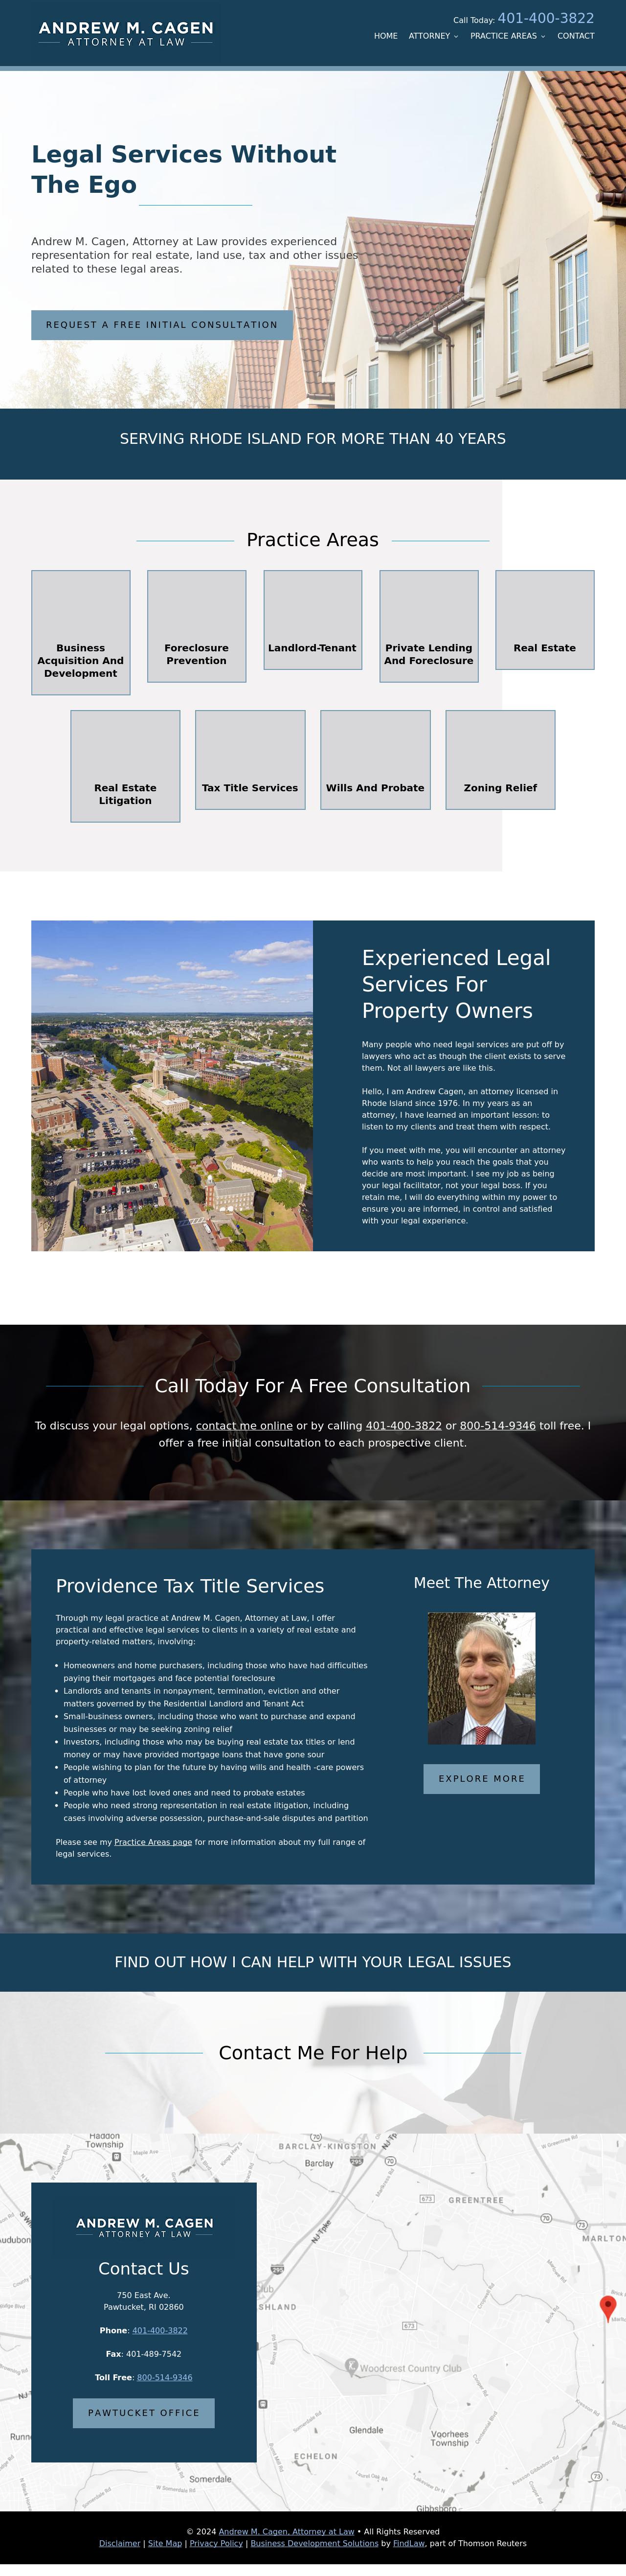 Andrew M. Cagen, Attorney at Law - Providence RI Lawyers